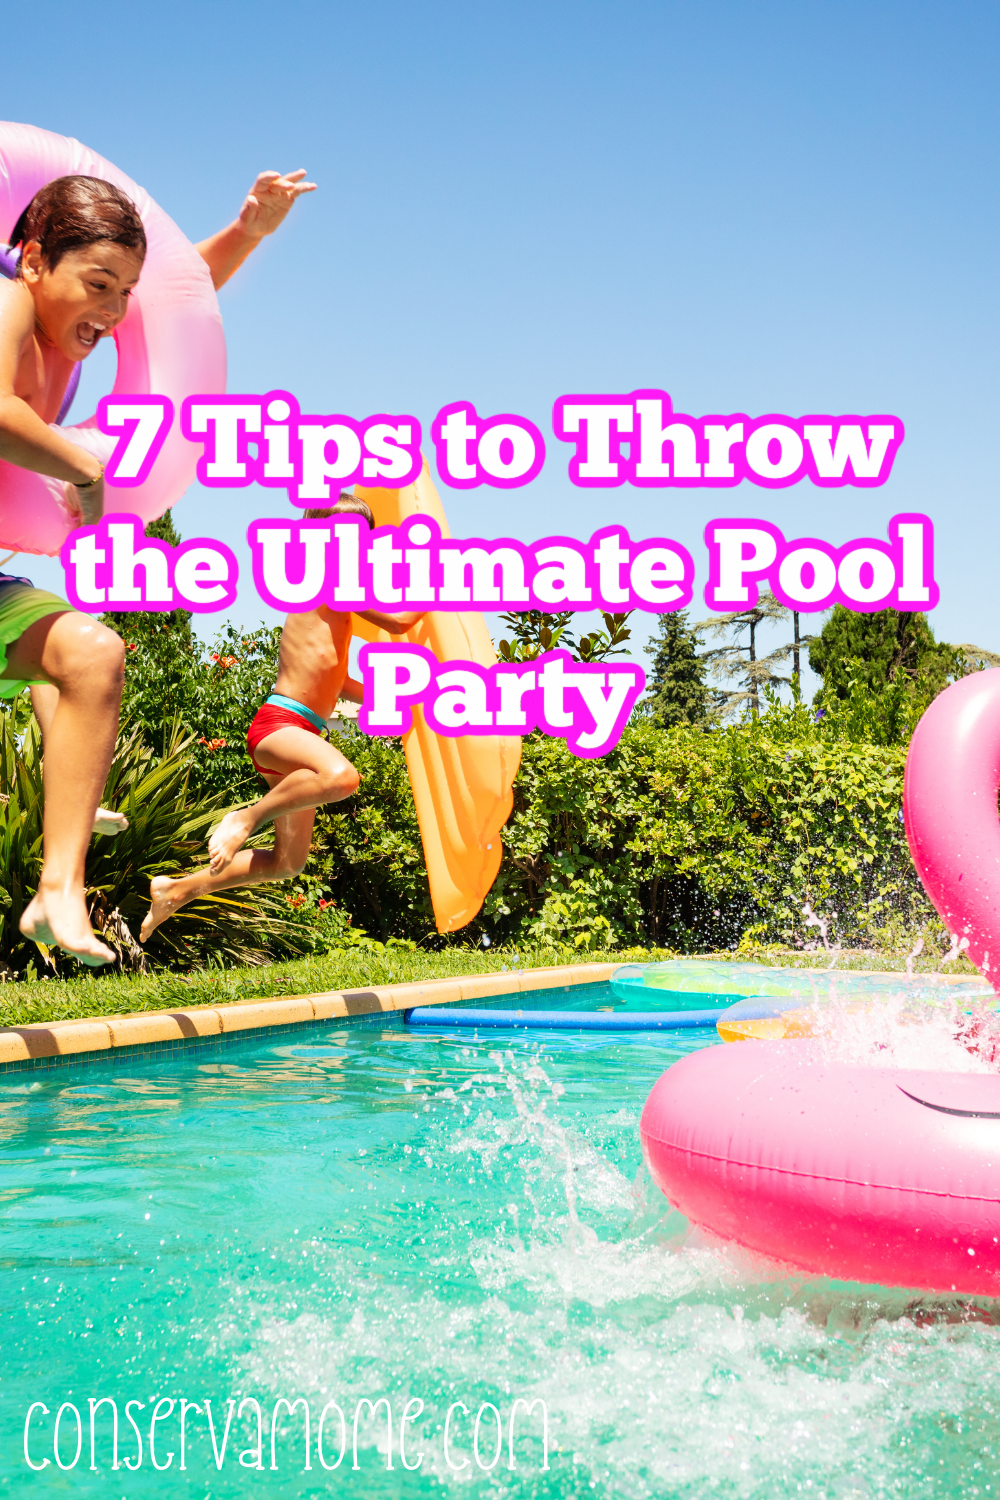 7 Tips to Throw the Ultimate Pool Party